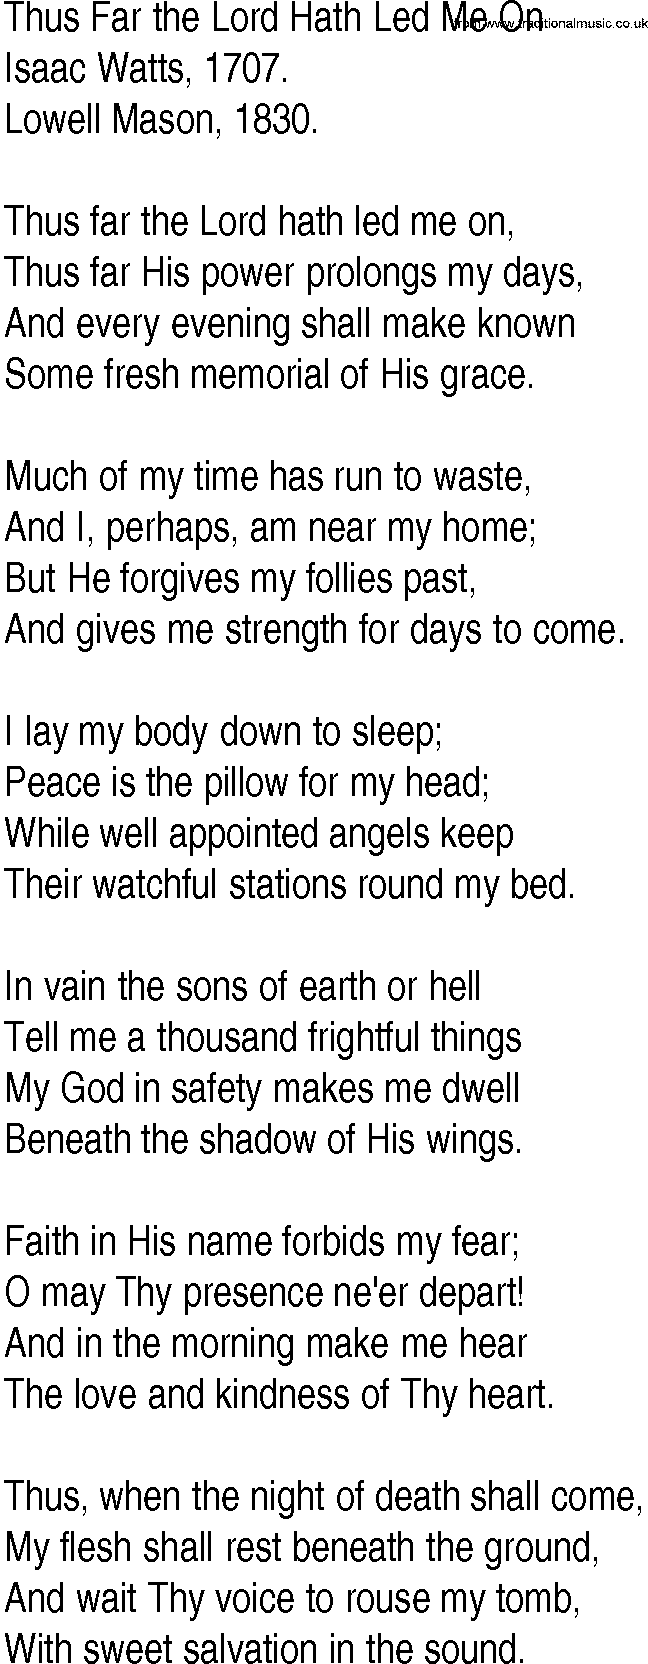 Hymn and Gospel Song: Thus Far the Lord Hath Led Me On by Isaac Watts lyrics